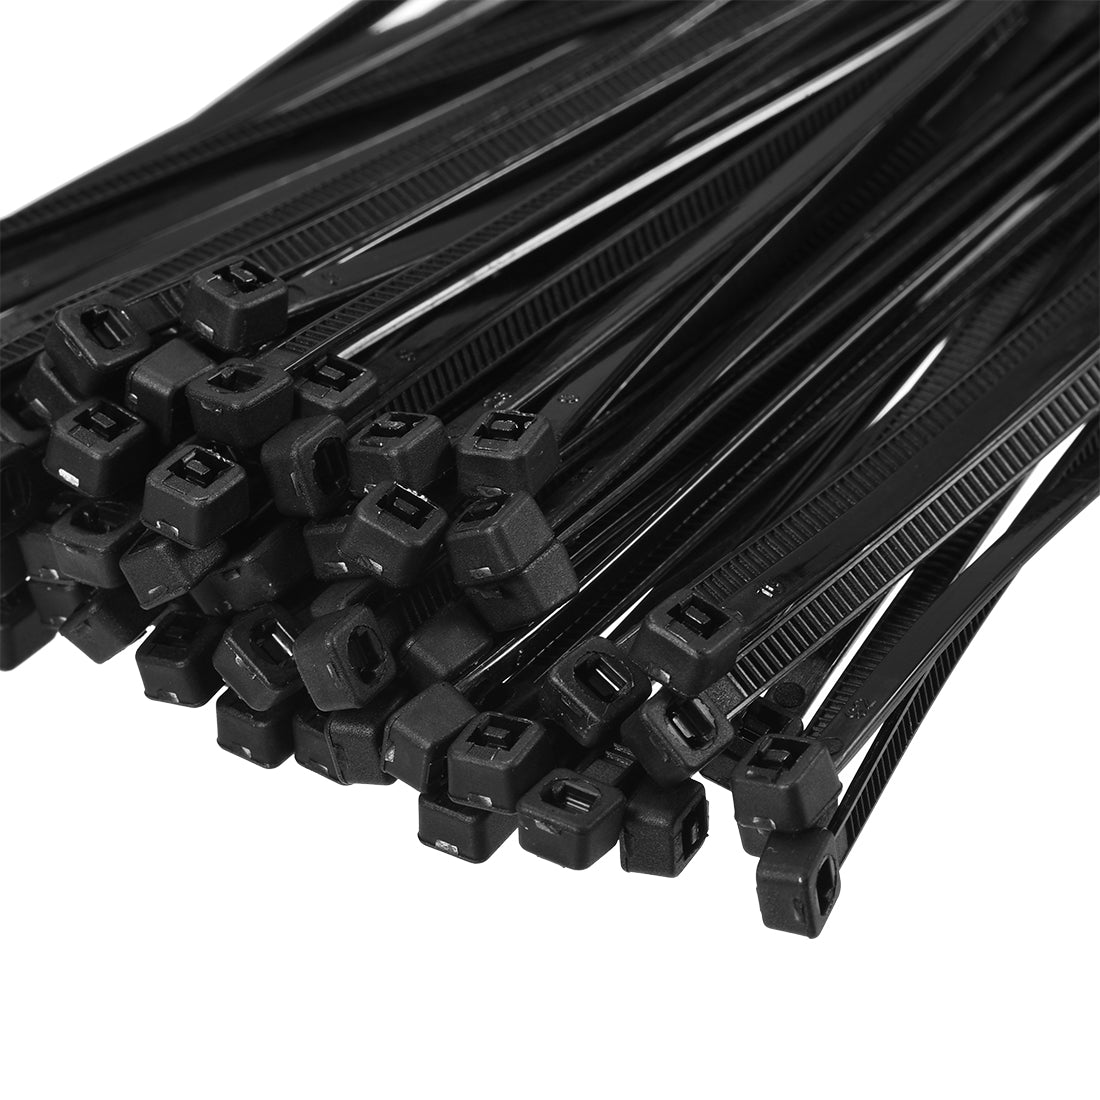 uxcell Uxcell Cable Zip Ties 120mmx1.8mm Self-Locking Nylon Tie Wraps Black 300pcs